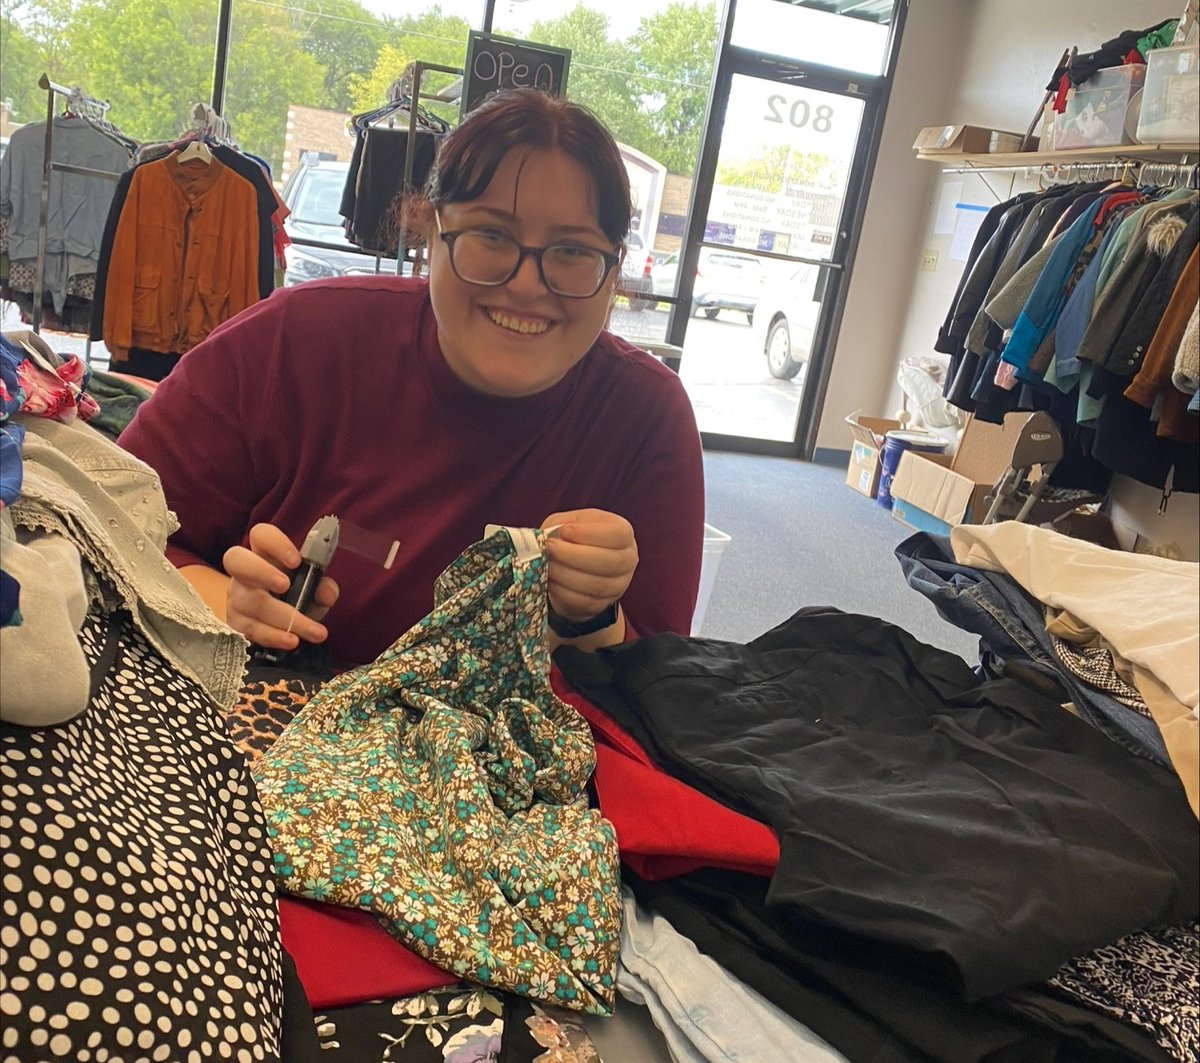 We caught our students in the act of doing good! Members of the KCU-Joplin American Medical Women’s Association volunteered with Lafayette House’s retail store, Second Chances, by helping organize, tag and hang clothing donations. #KCUStudents